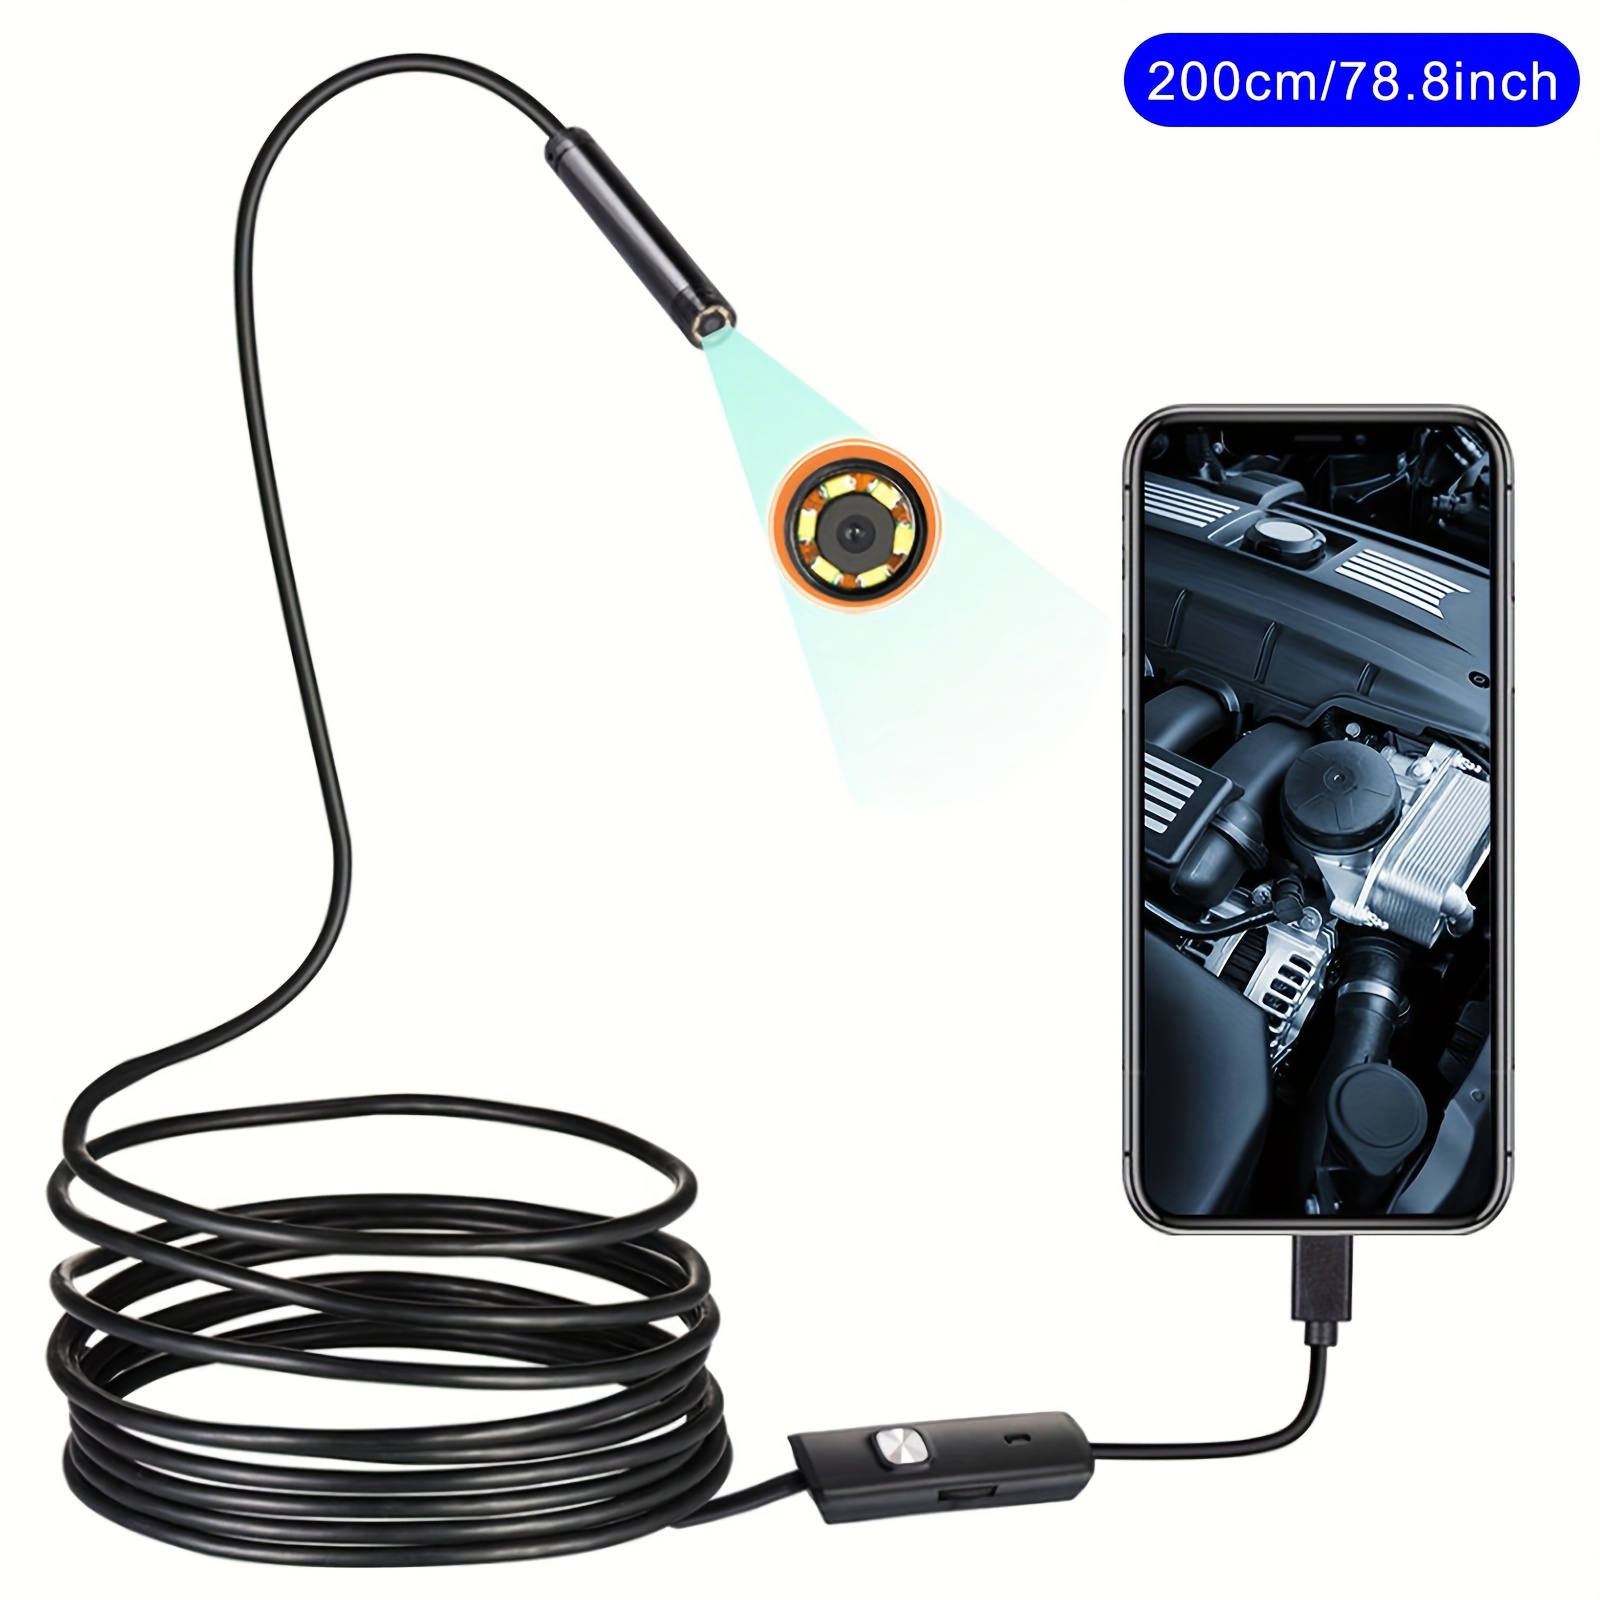 2 IN 1 2M Endoscope 7MM Endoscope HD USB Android Endoscopio OTG IP67  Android Borescope USB Endoskop Inspection Camera From Sellerbest, $4.75